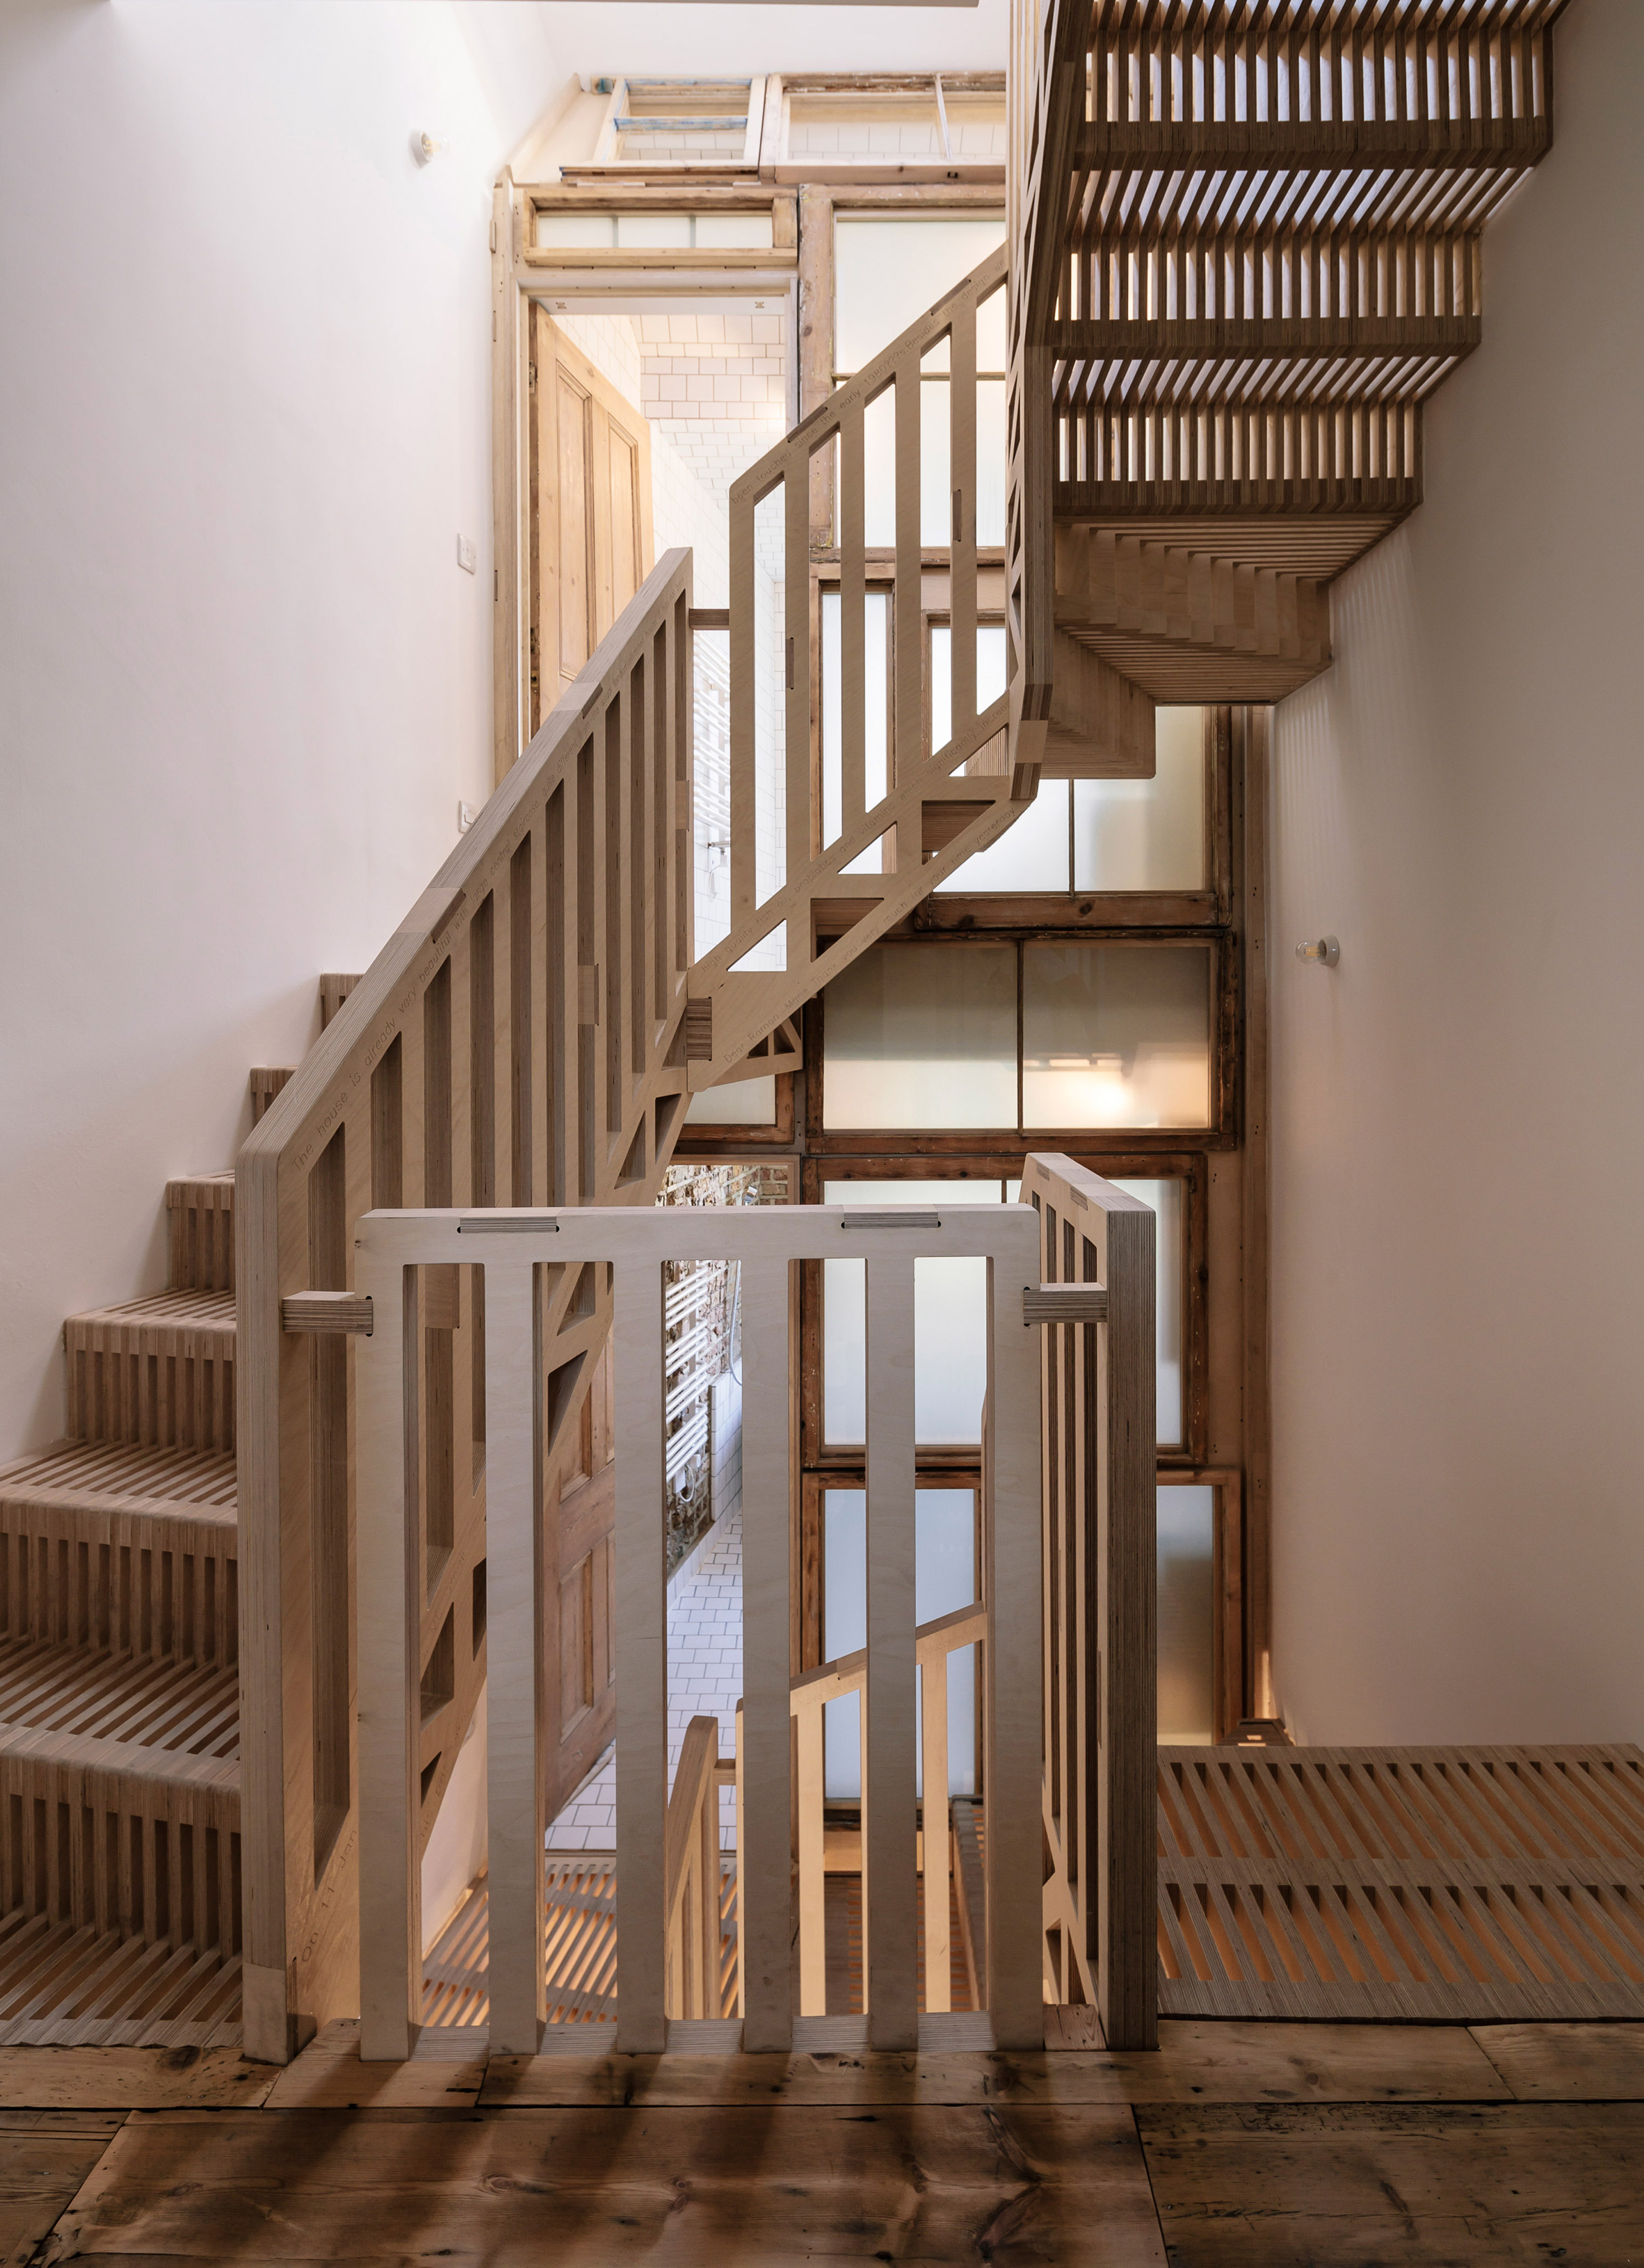 Tsurata Architects designs staircase in London house